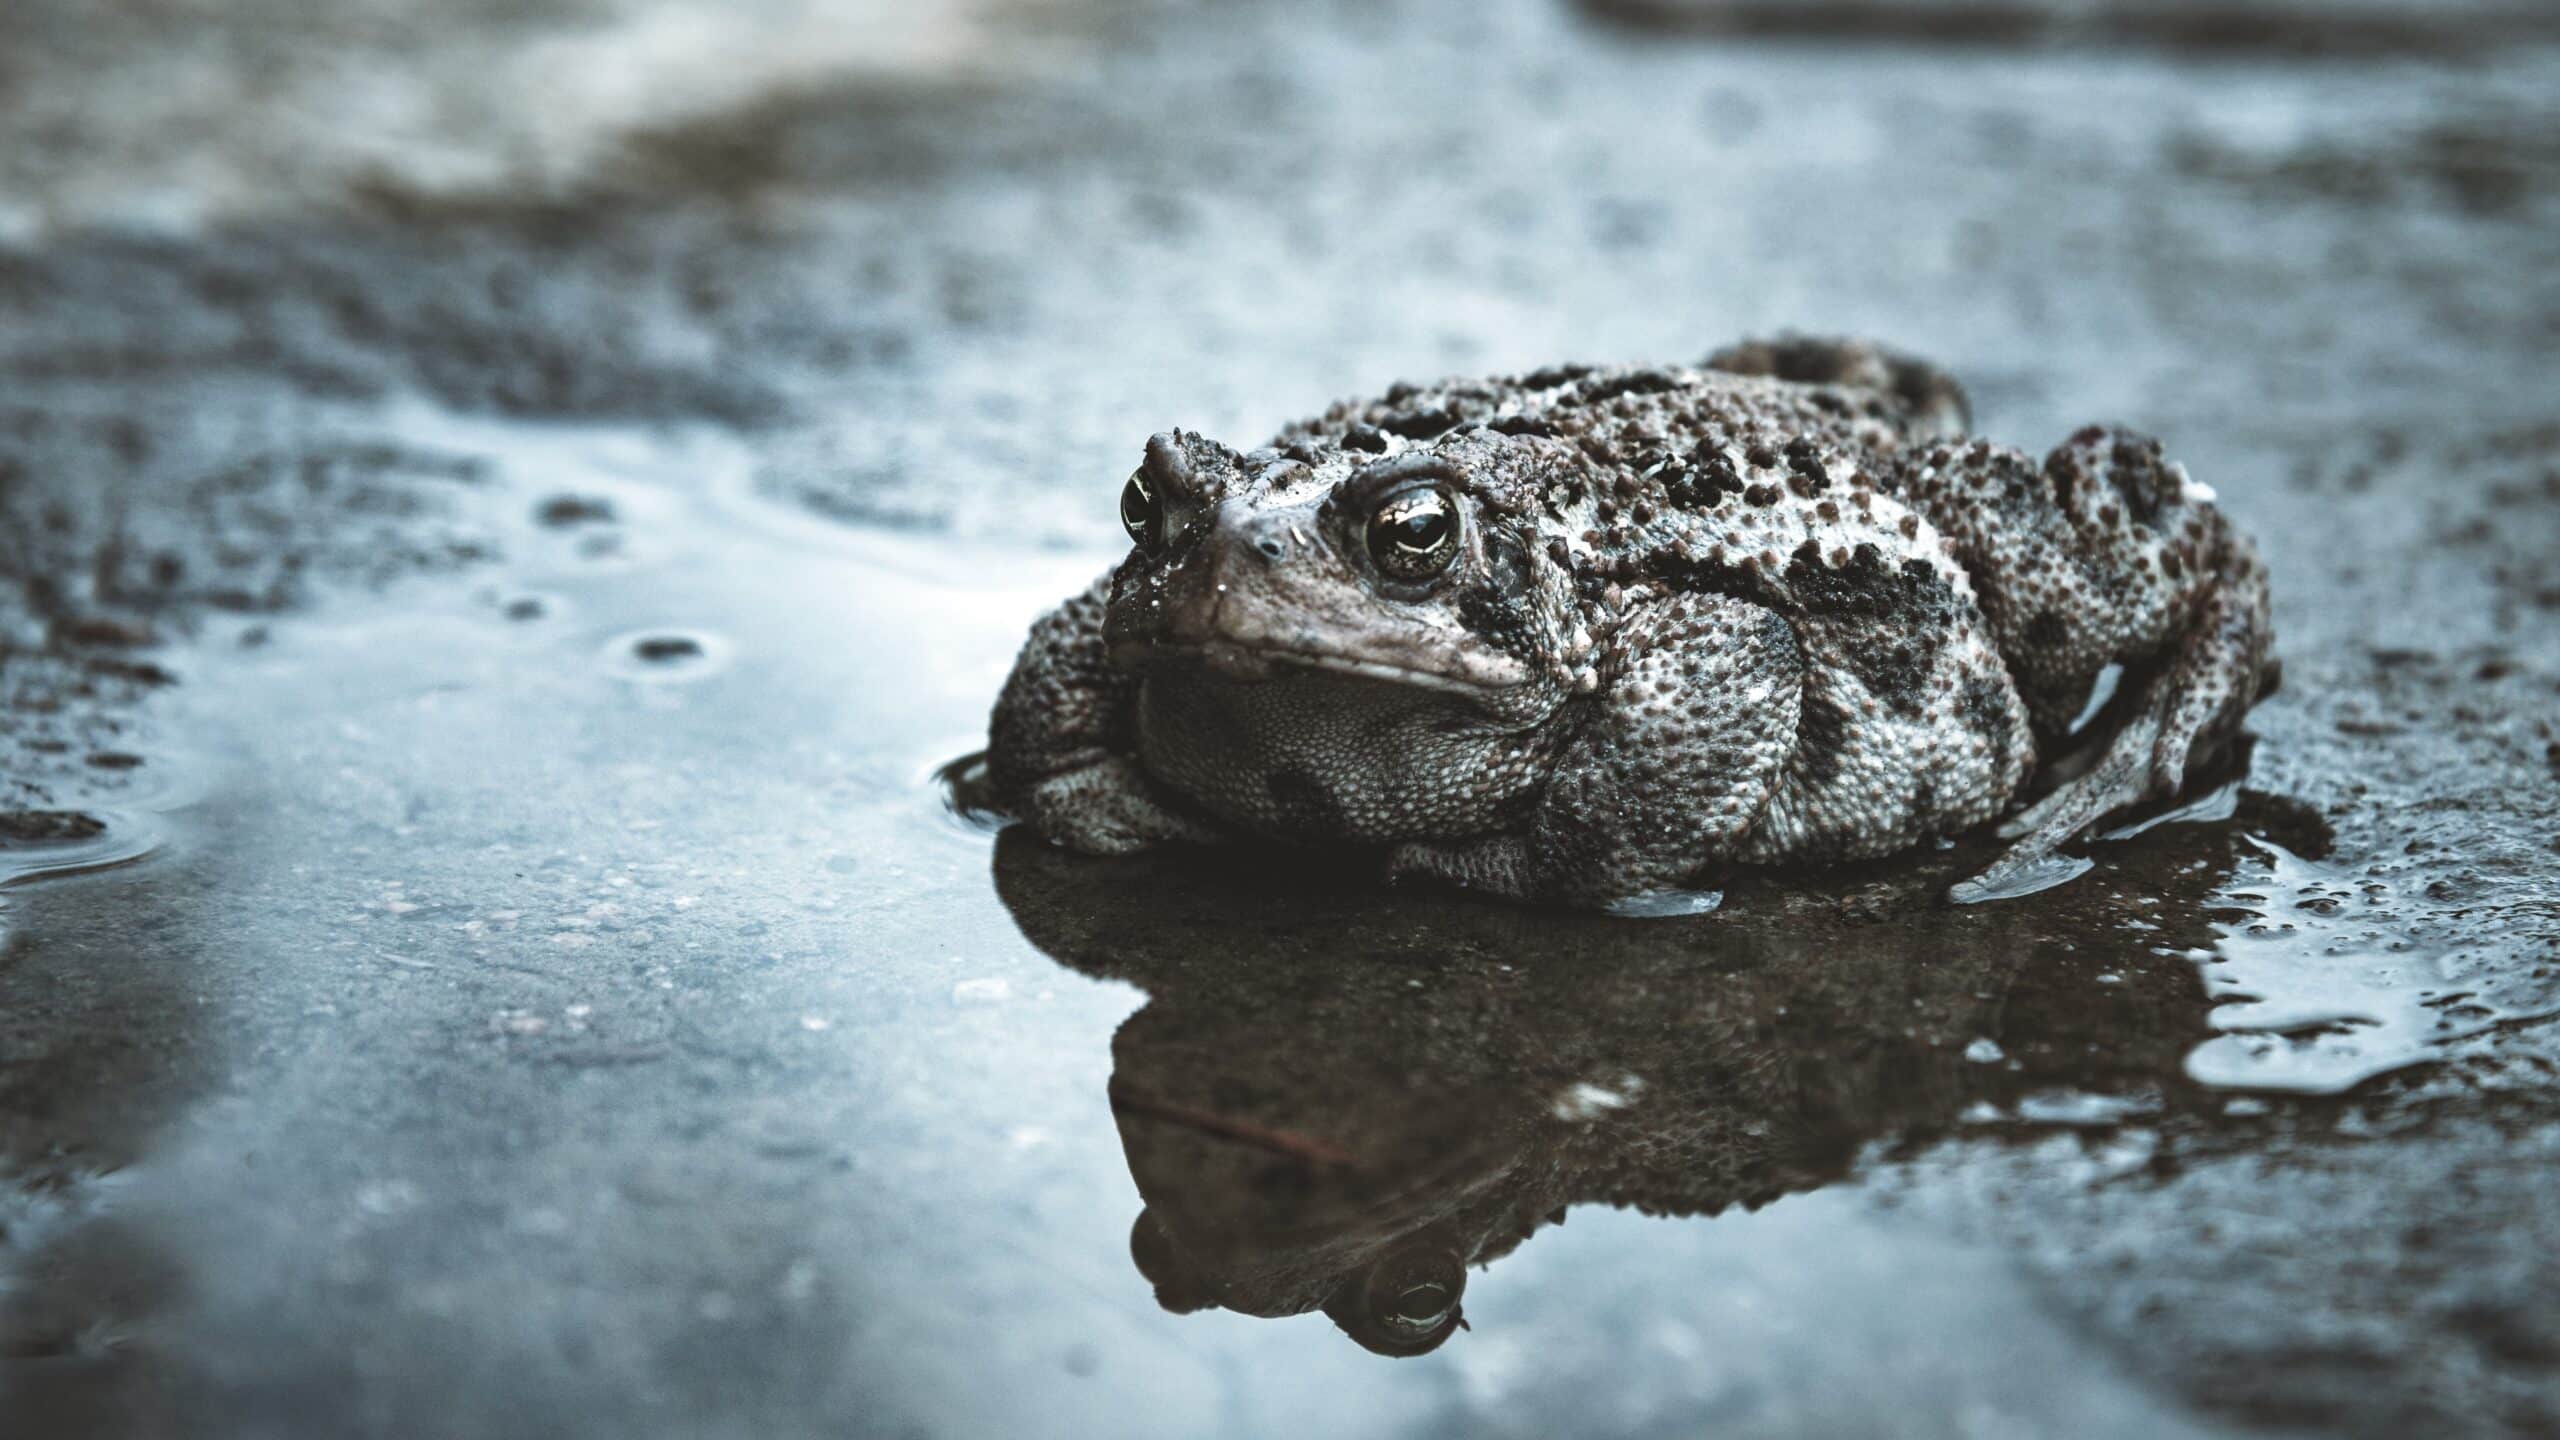 Toad in a puddle